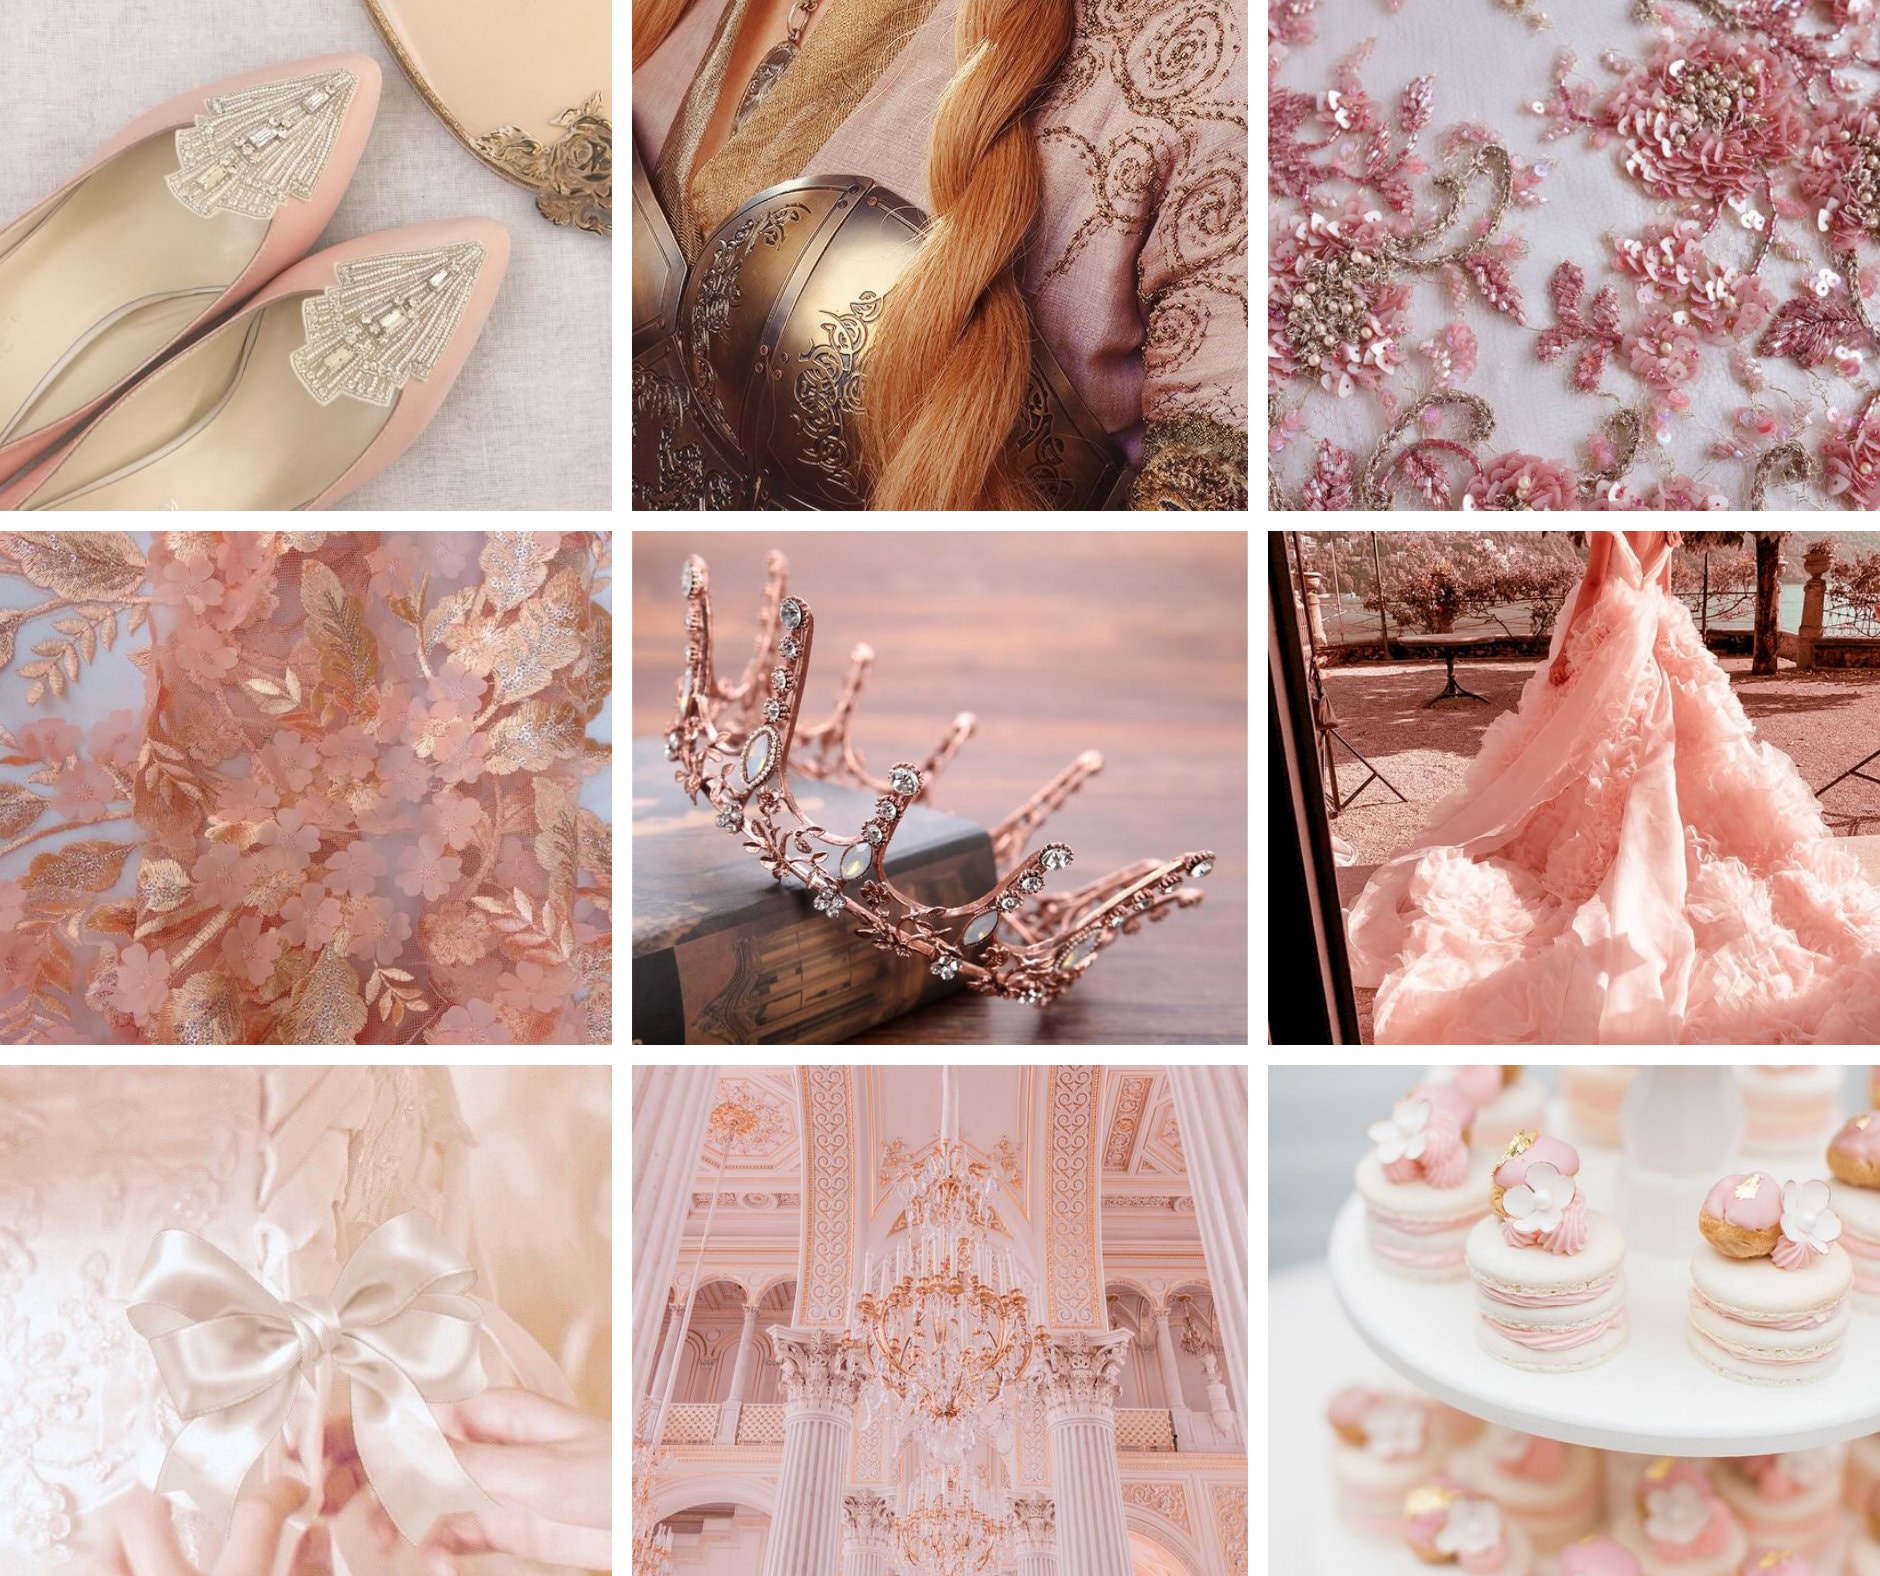 Royalcore Aesthetic Wall Collage Kit Pink Room Decor Collage